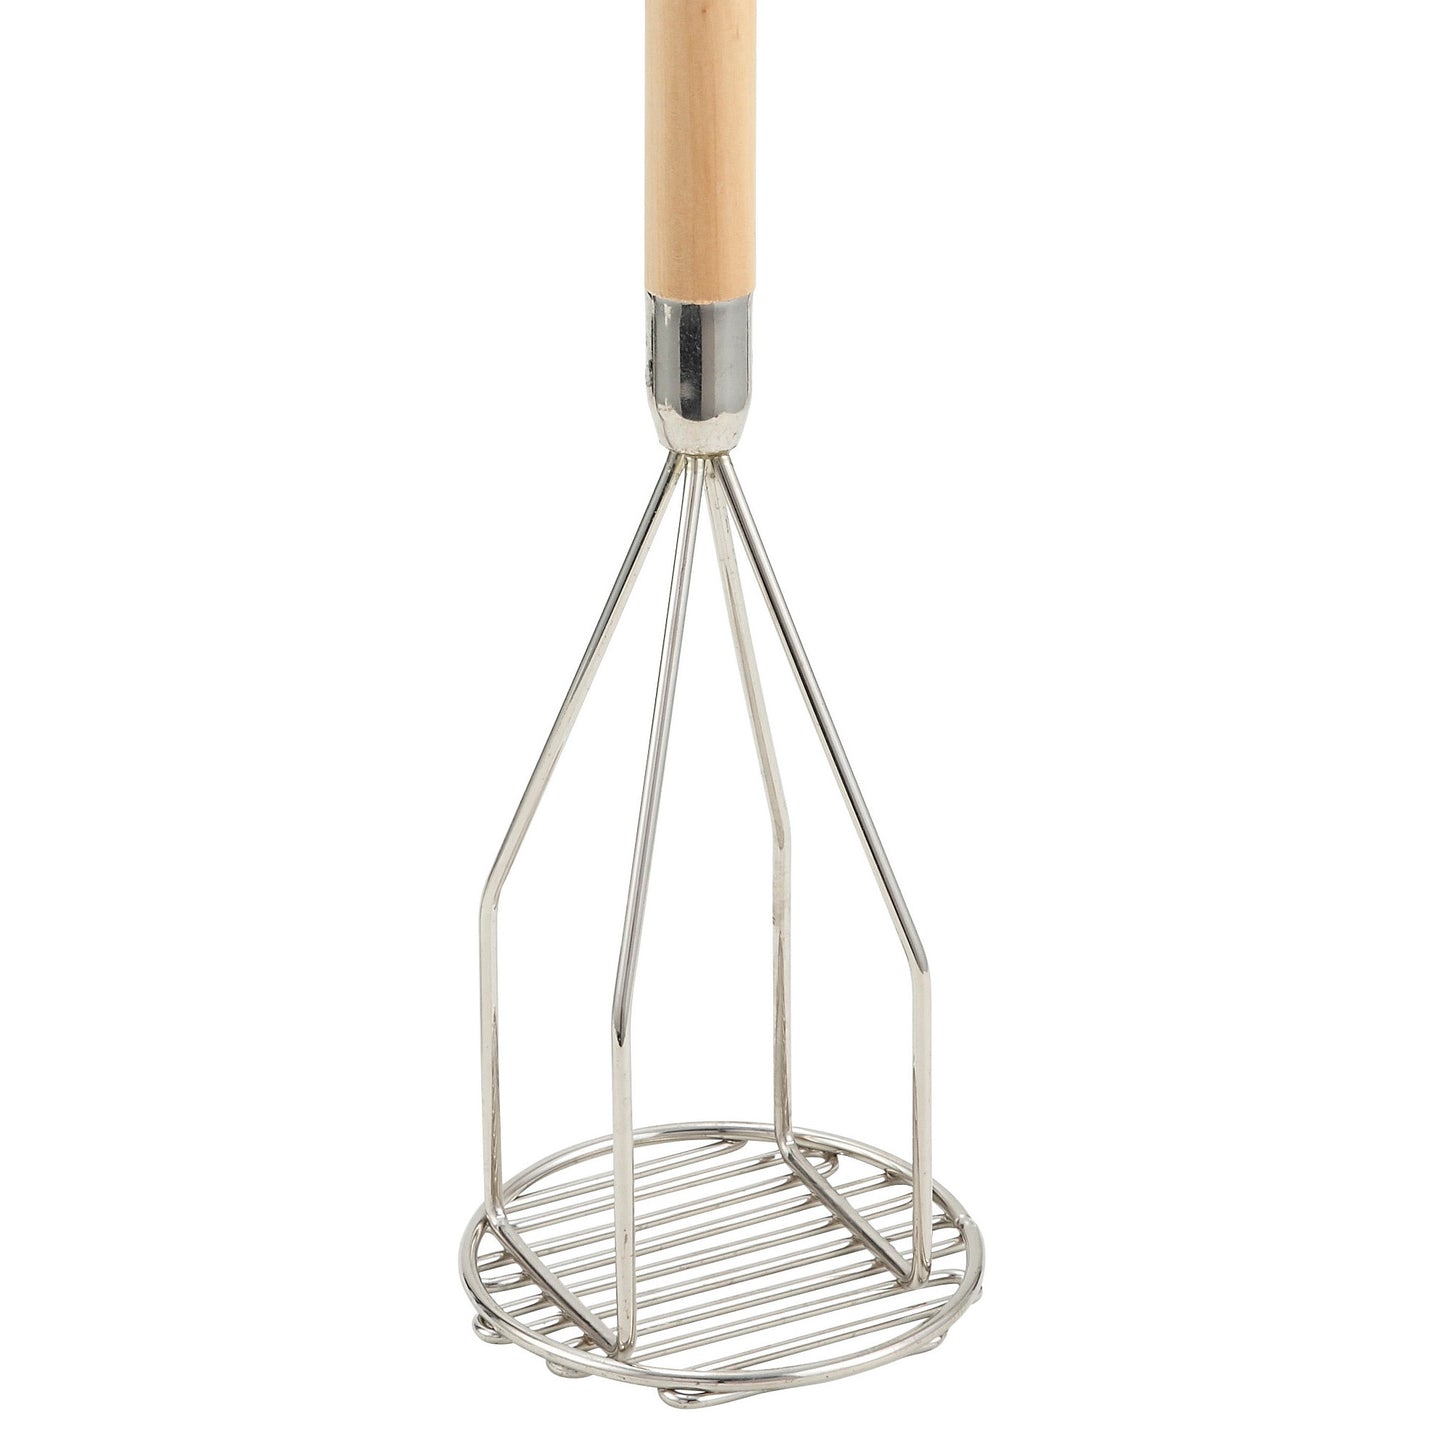 PTM-24R - Potato Masher with Wooden Handle - 5" Round